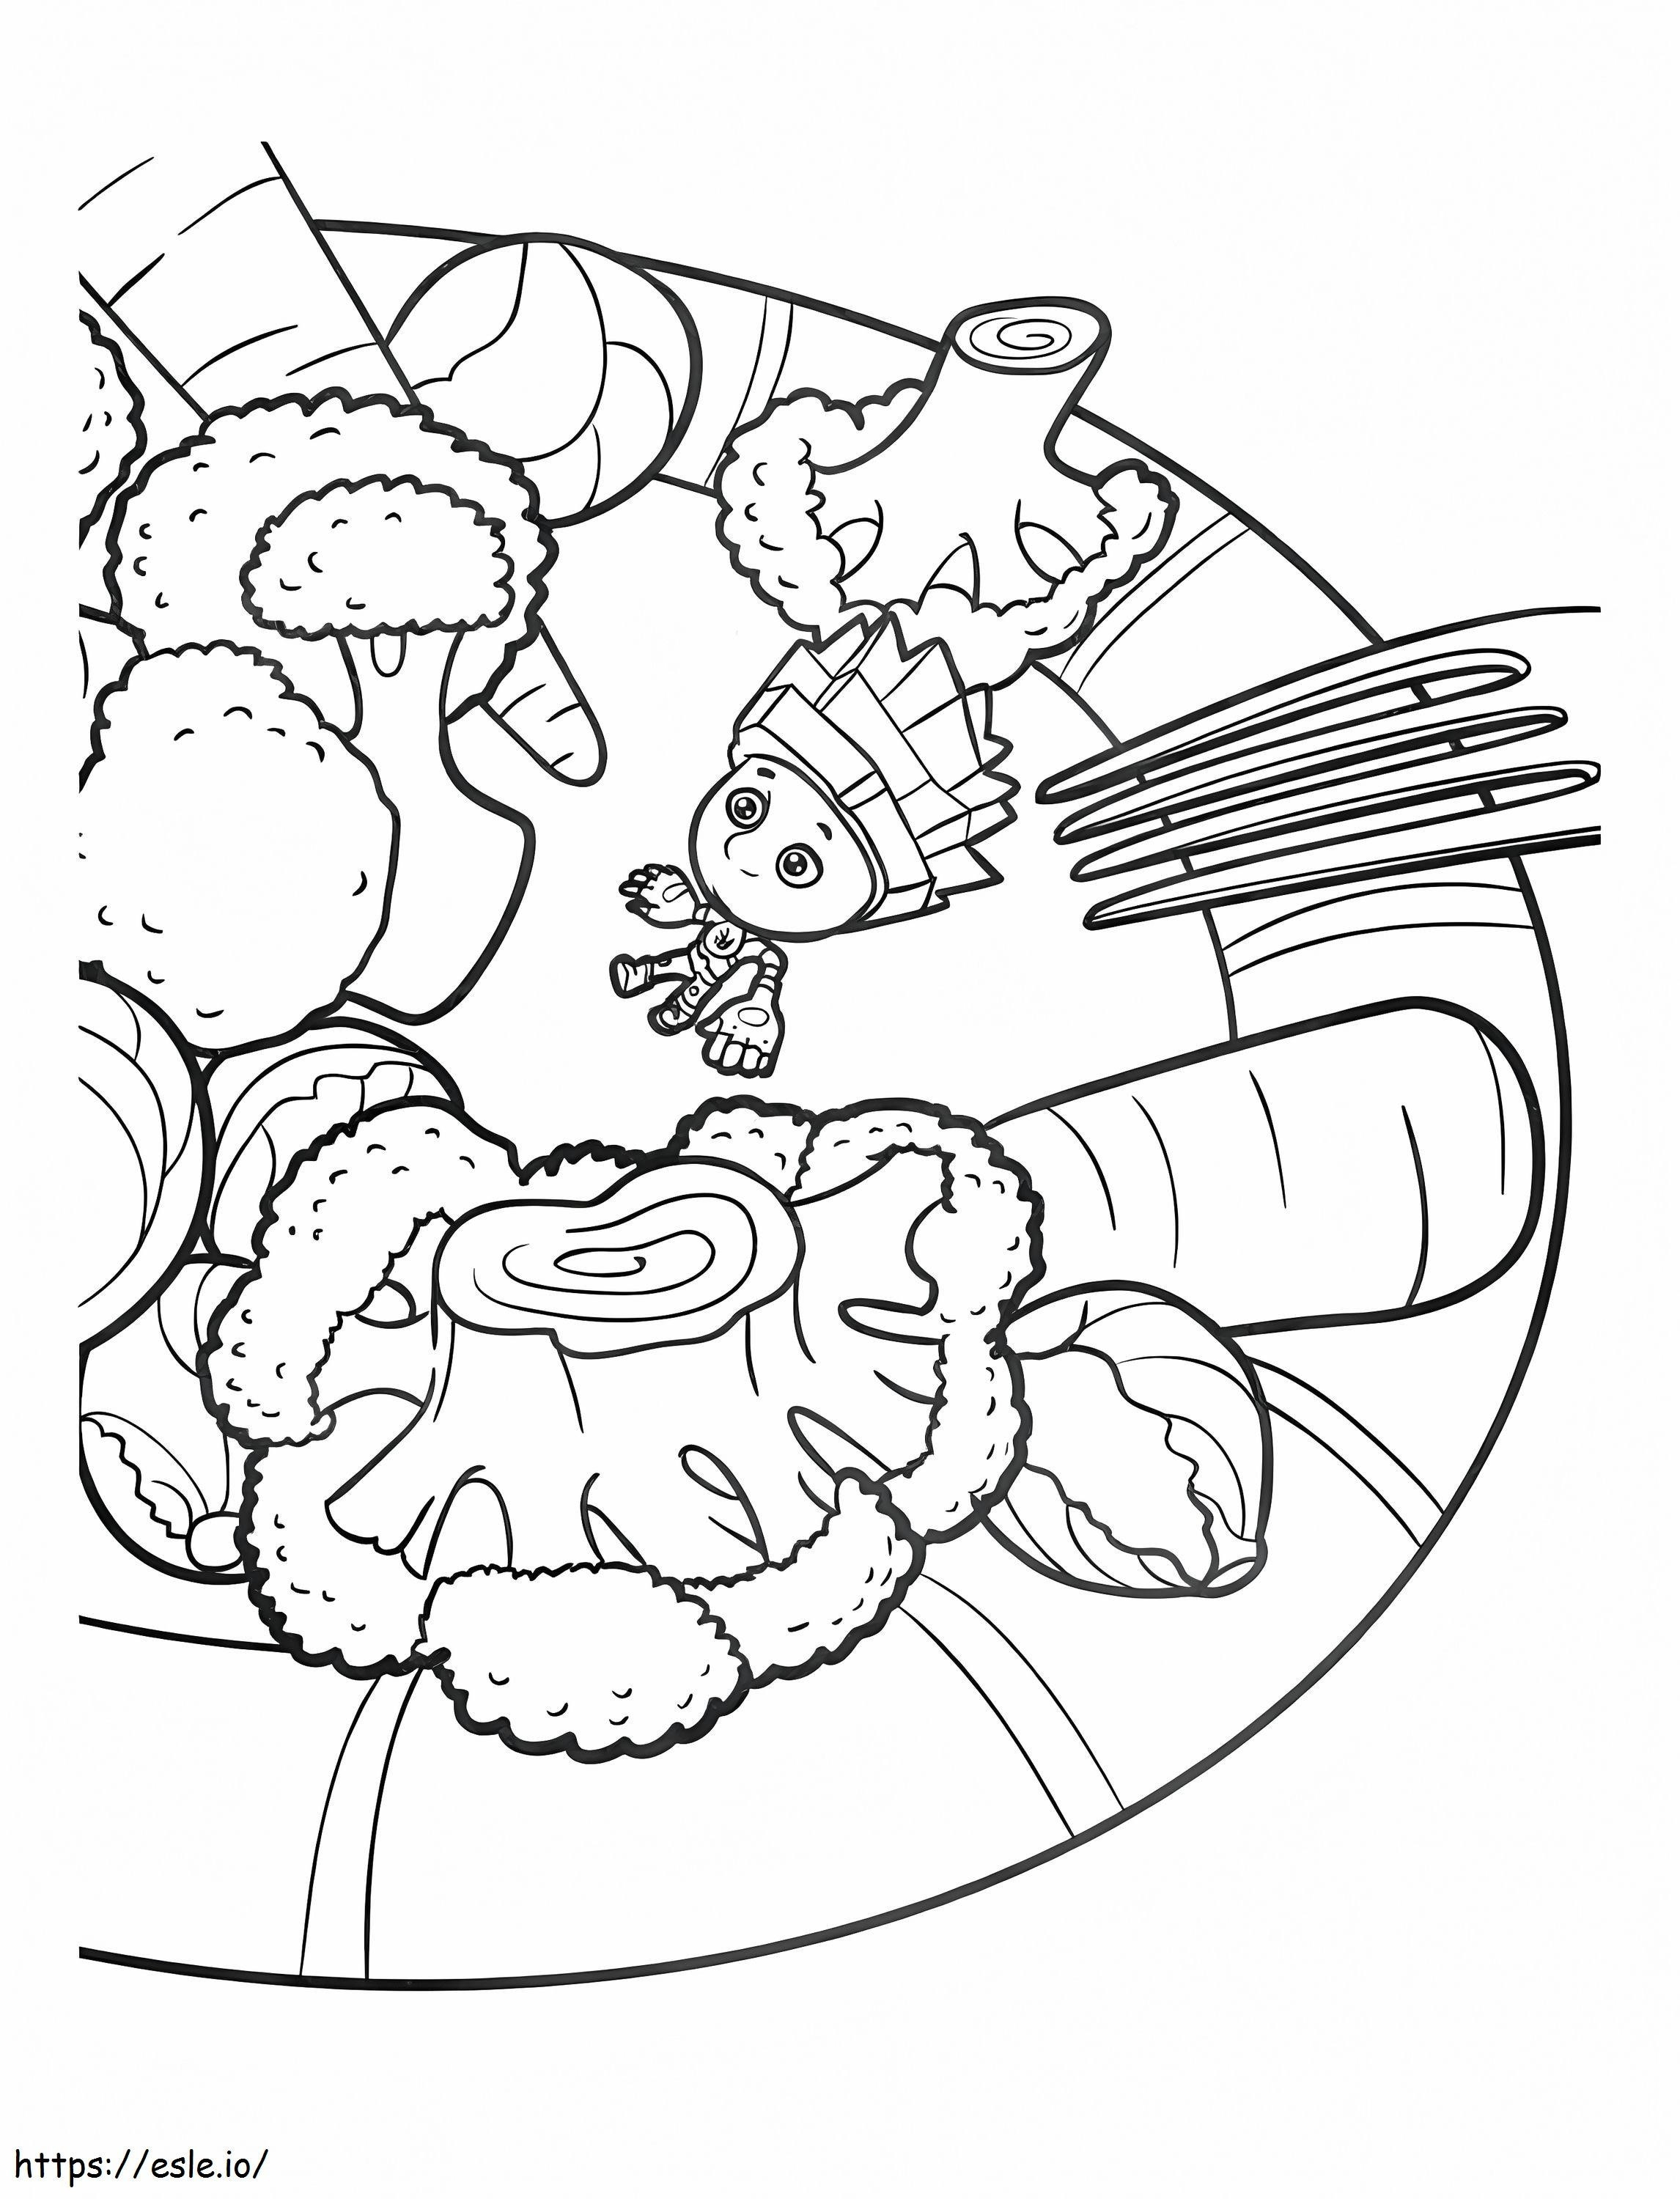 Nolik And Food coloring page